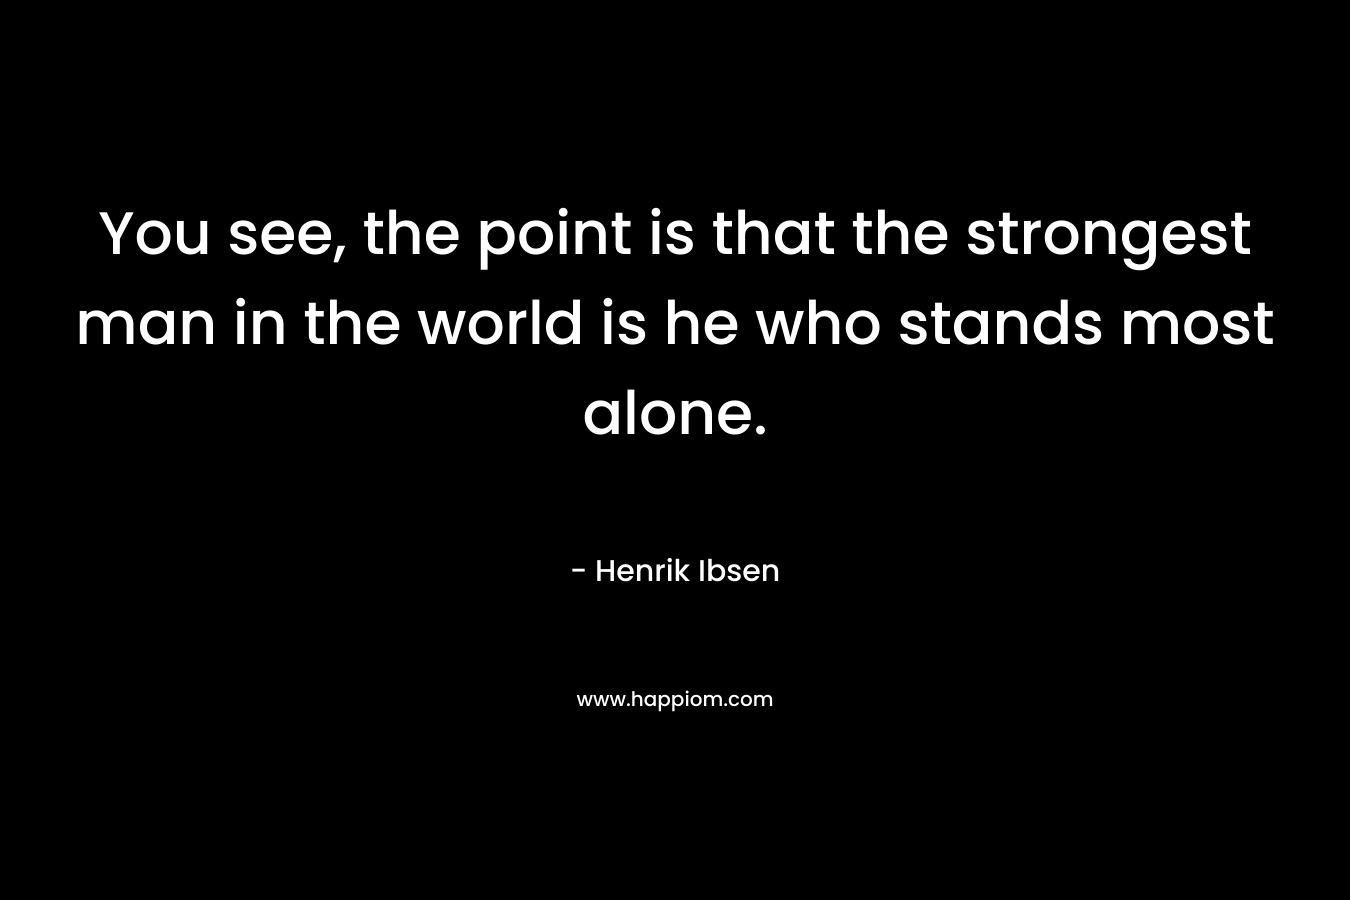 You see, the point is that the strongest man in the world is he who stands most alone. – Henrik Ibsen